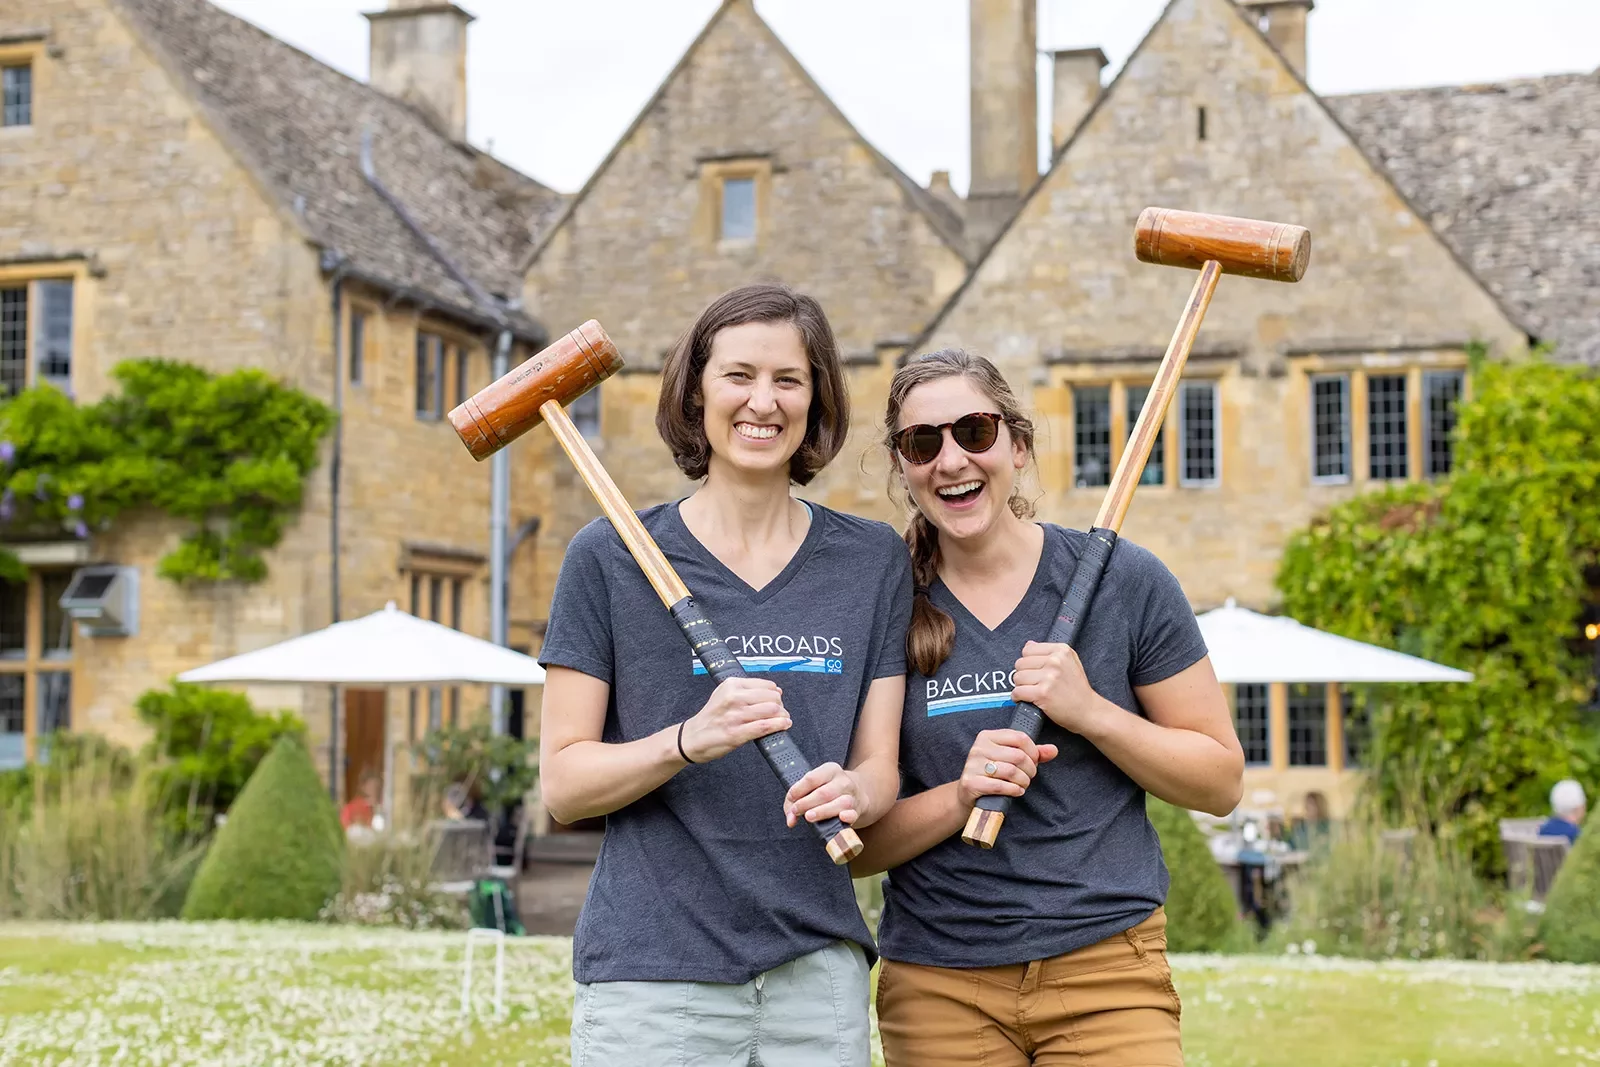 Two Backroads guests playing croquet in England.